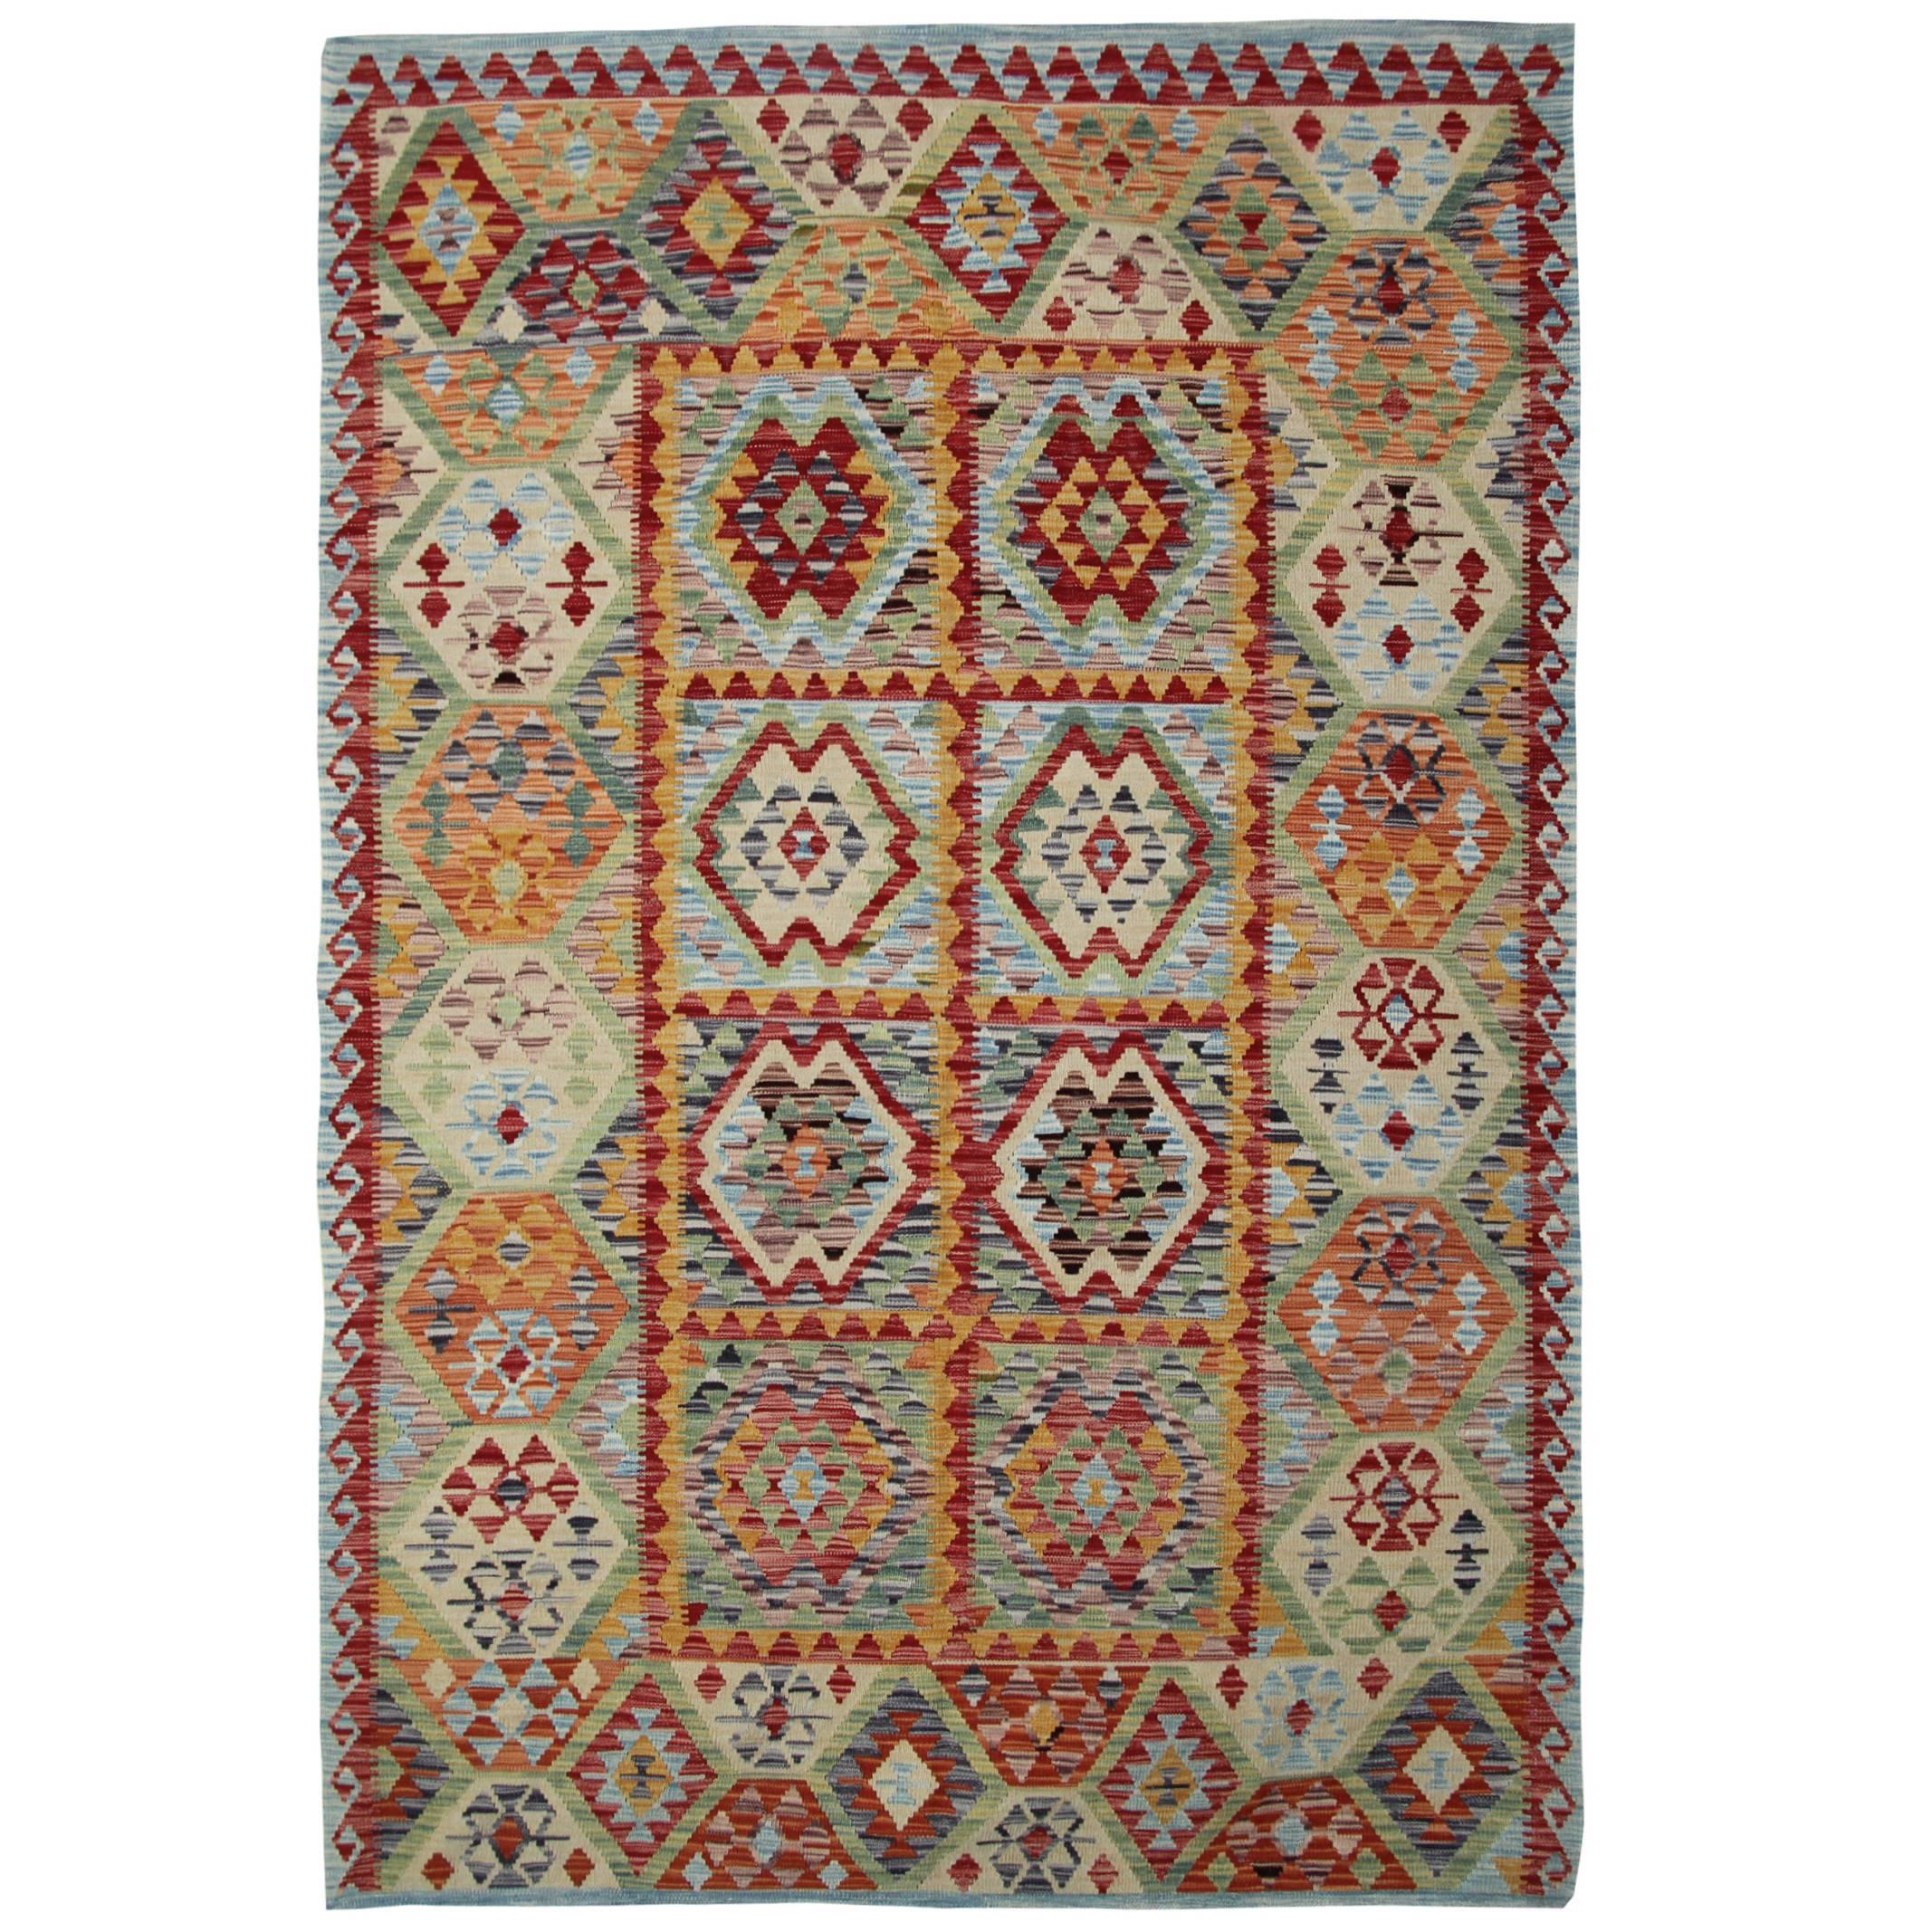 Afghan Kilim Rugs with Light Green and Deep Red